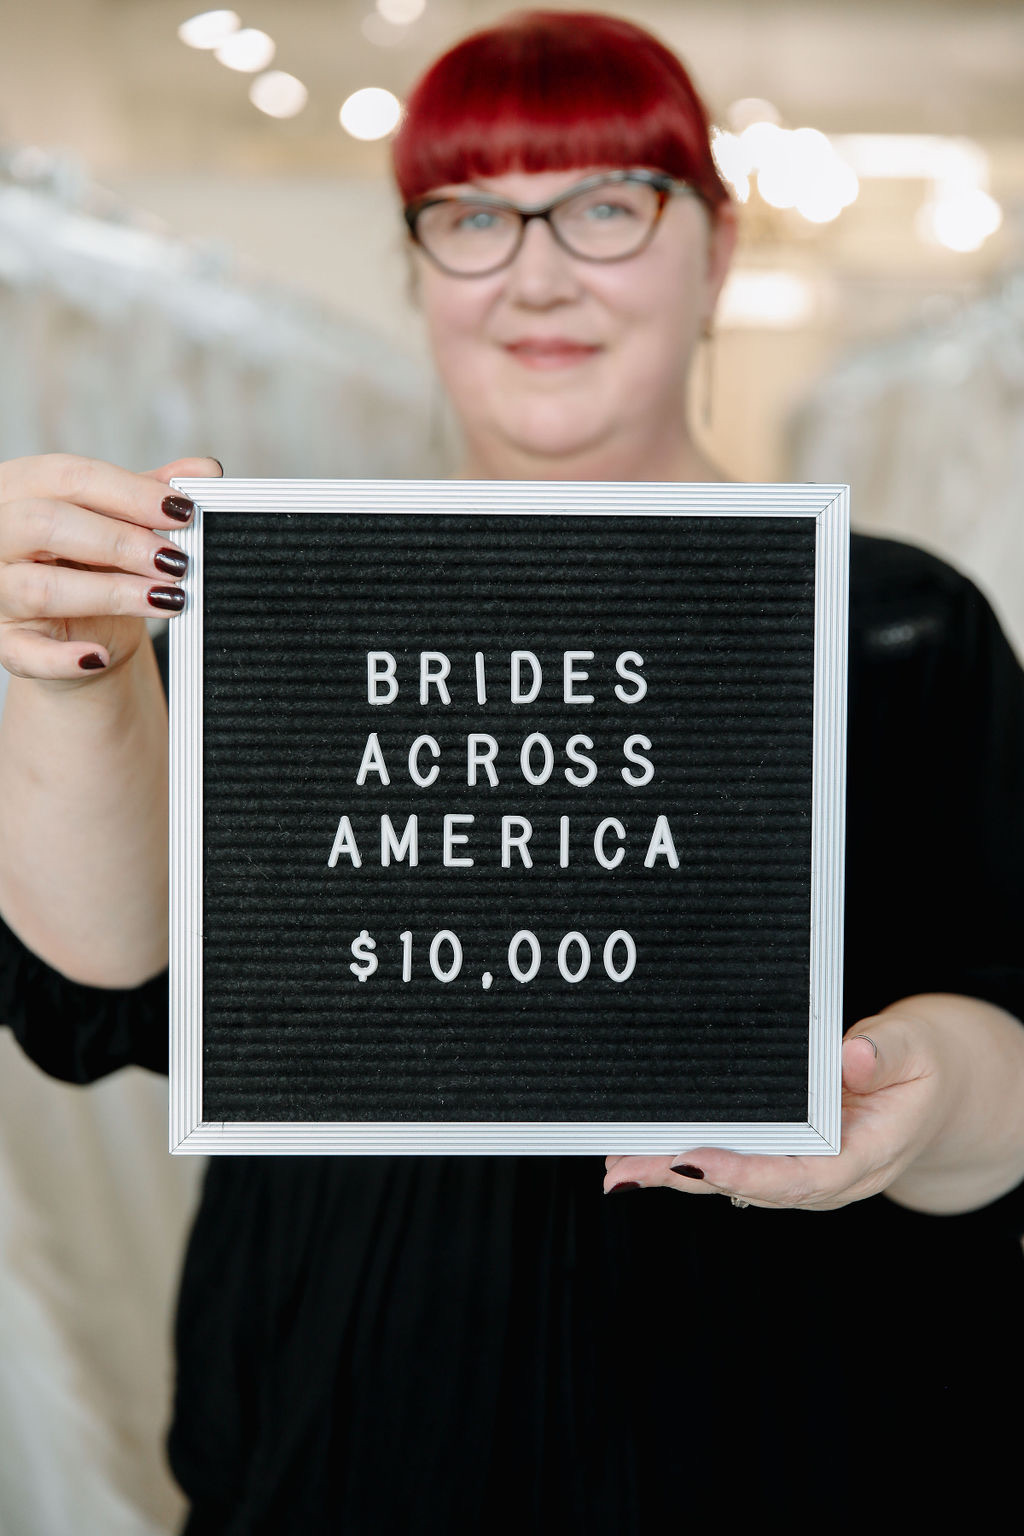 2022 Gift of $10,000 to Brides Across America!